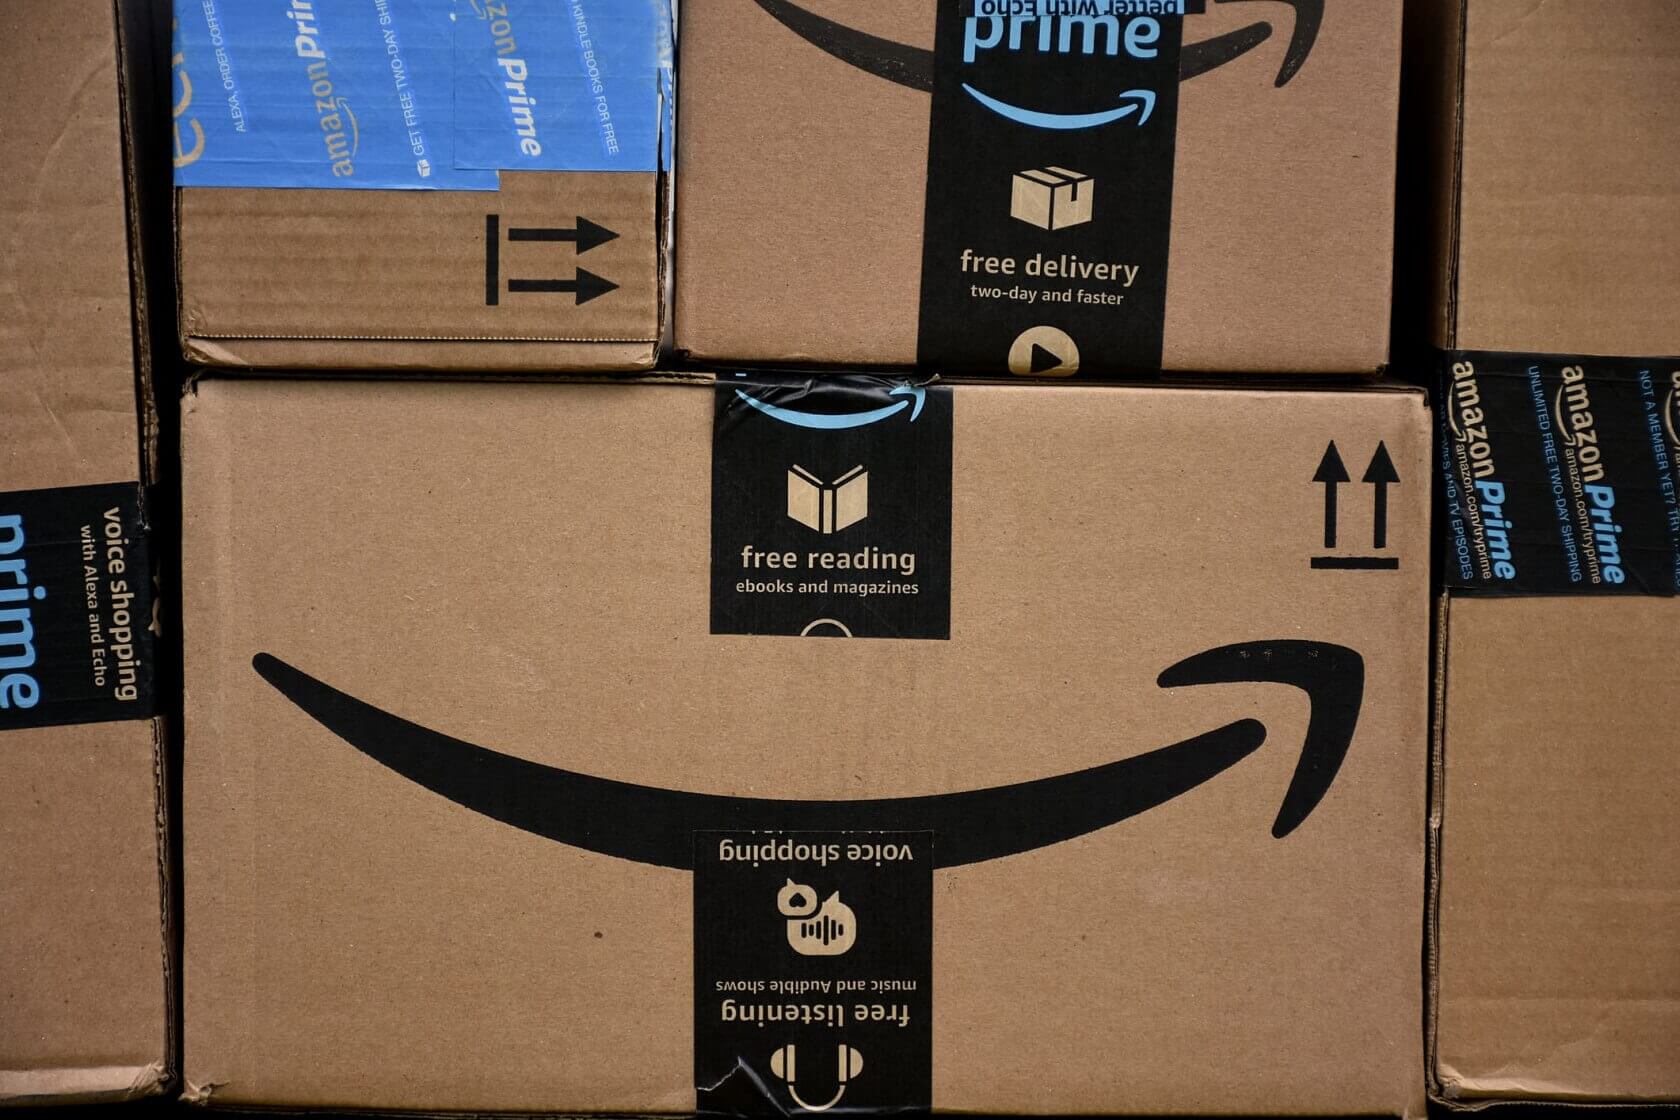 Amazon temporarily limits Fulfilled by Amazon shipments to household staples and medical supplies